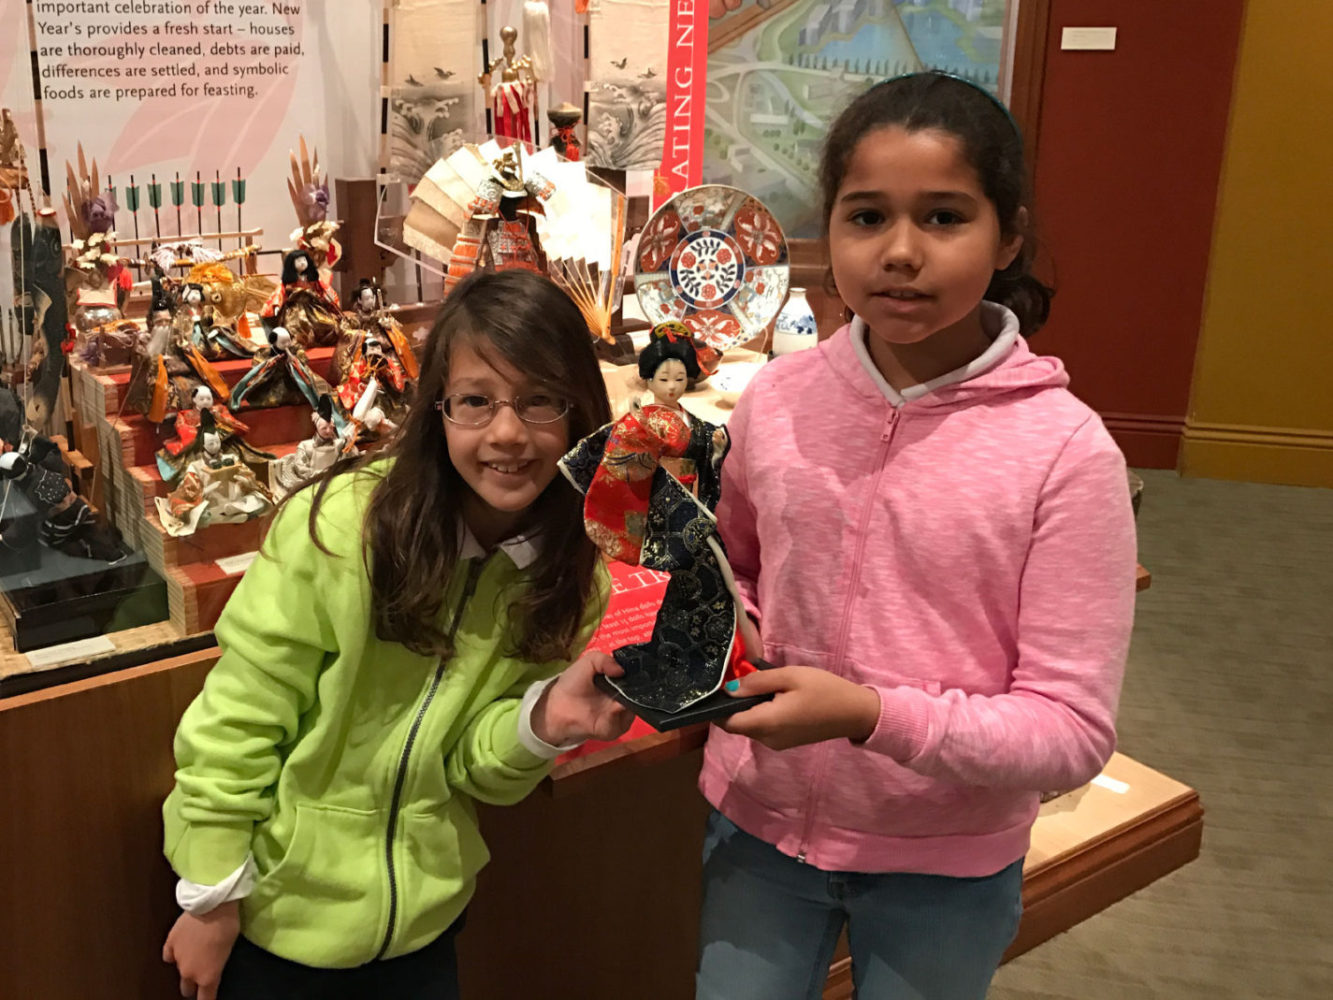 Students hold a doll at the People from Many Places school program at the San Mateo County History Museum